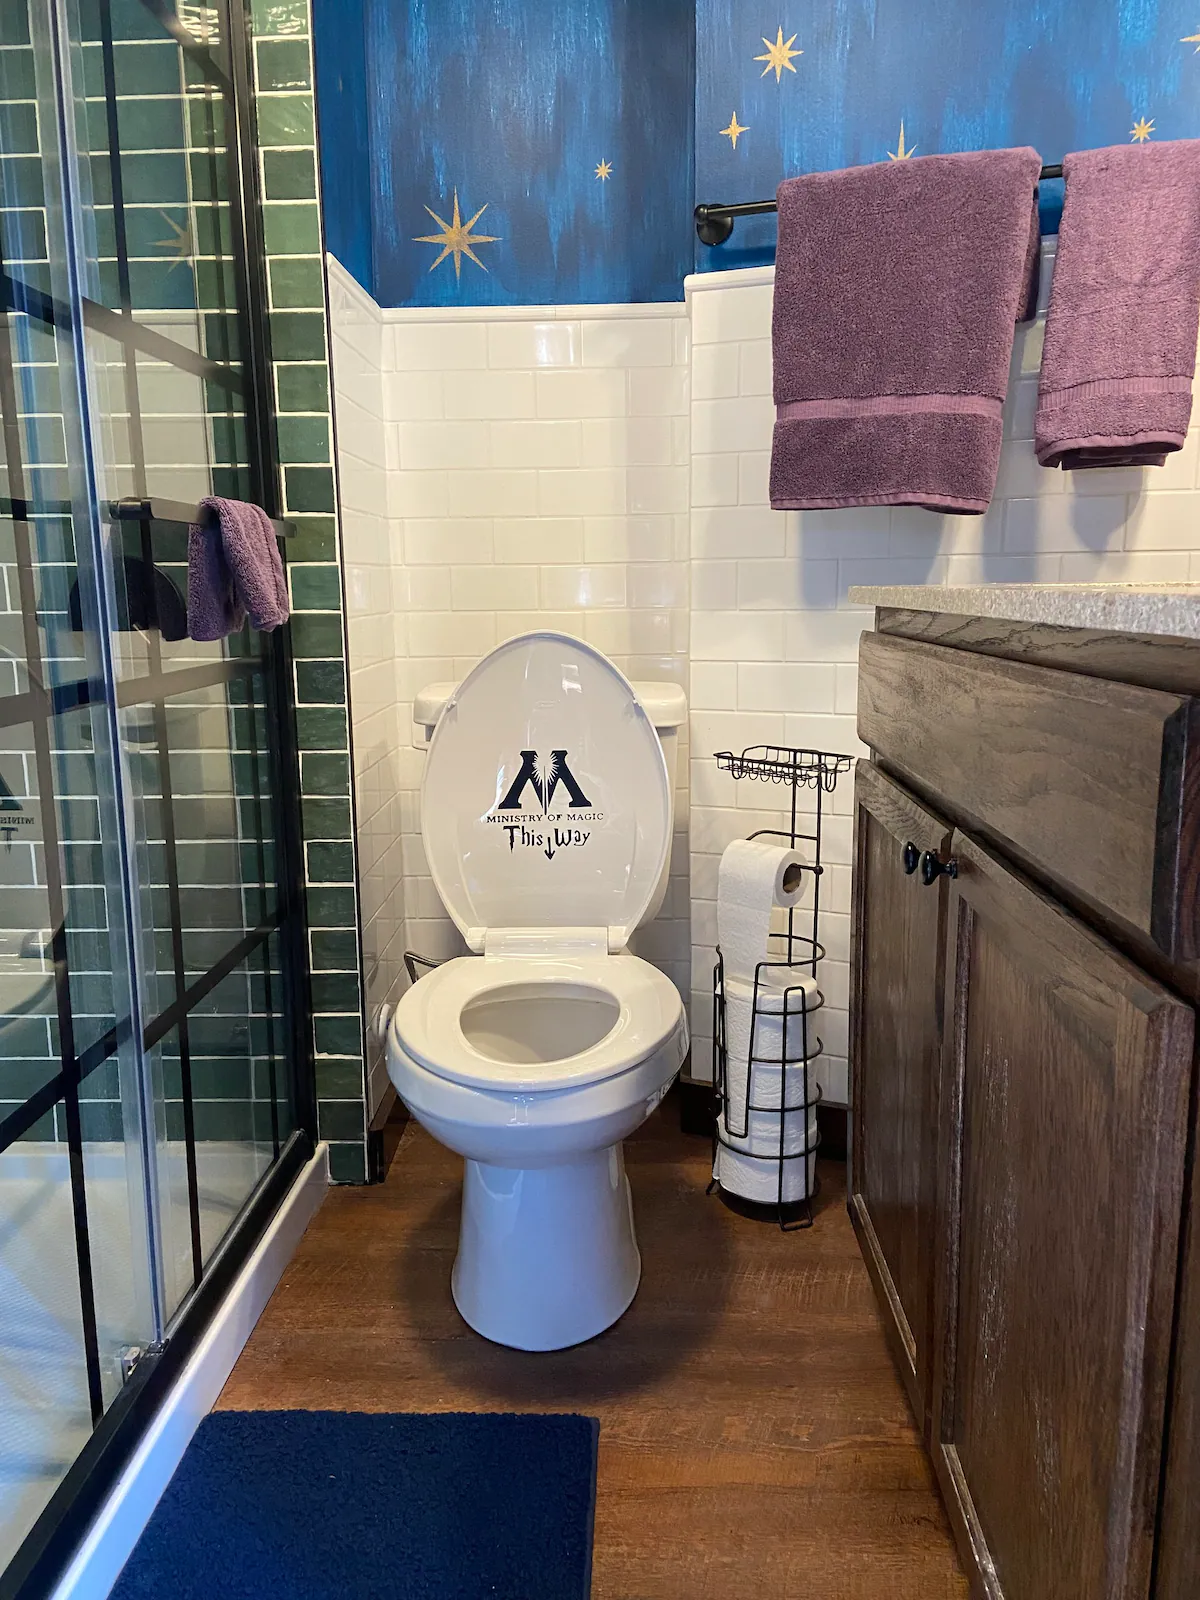 The bathroom of the Wizard’s Trolley includes an entrance to the Ministry of Magic via toilet.